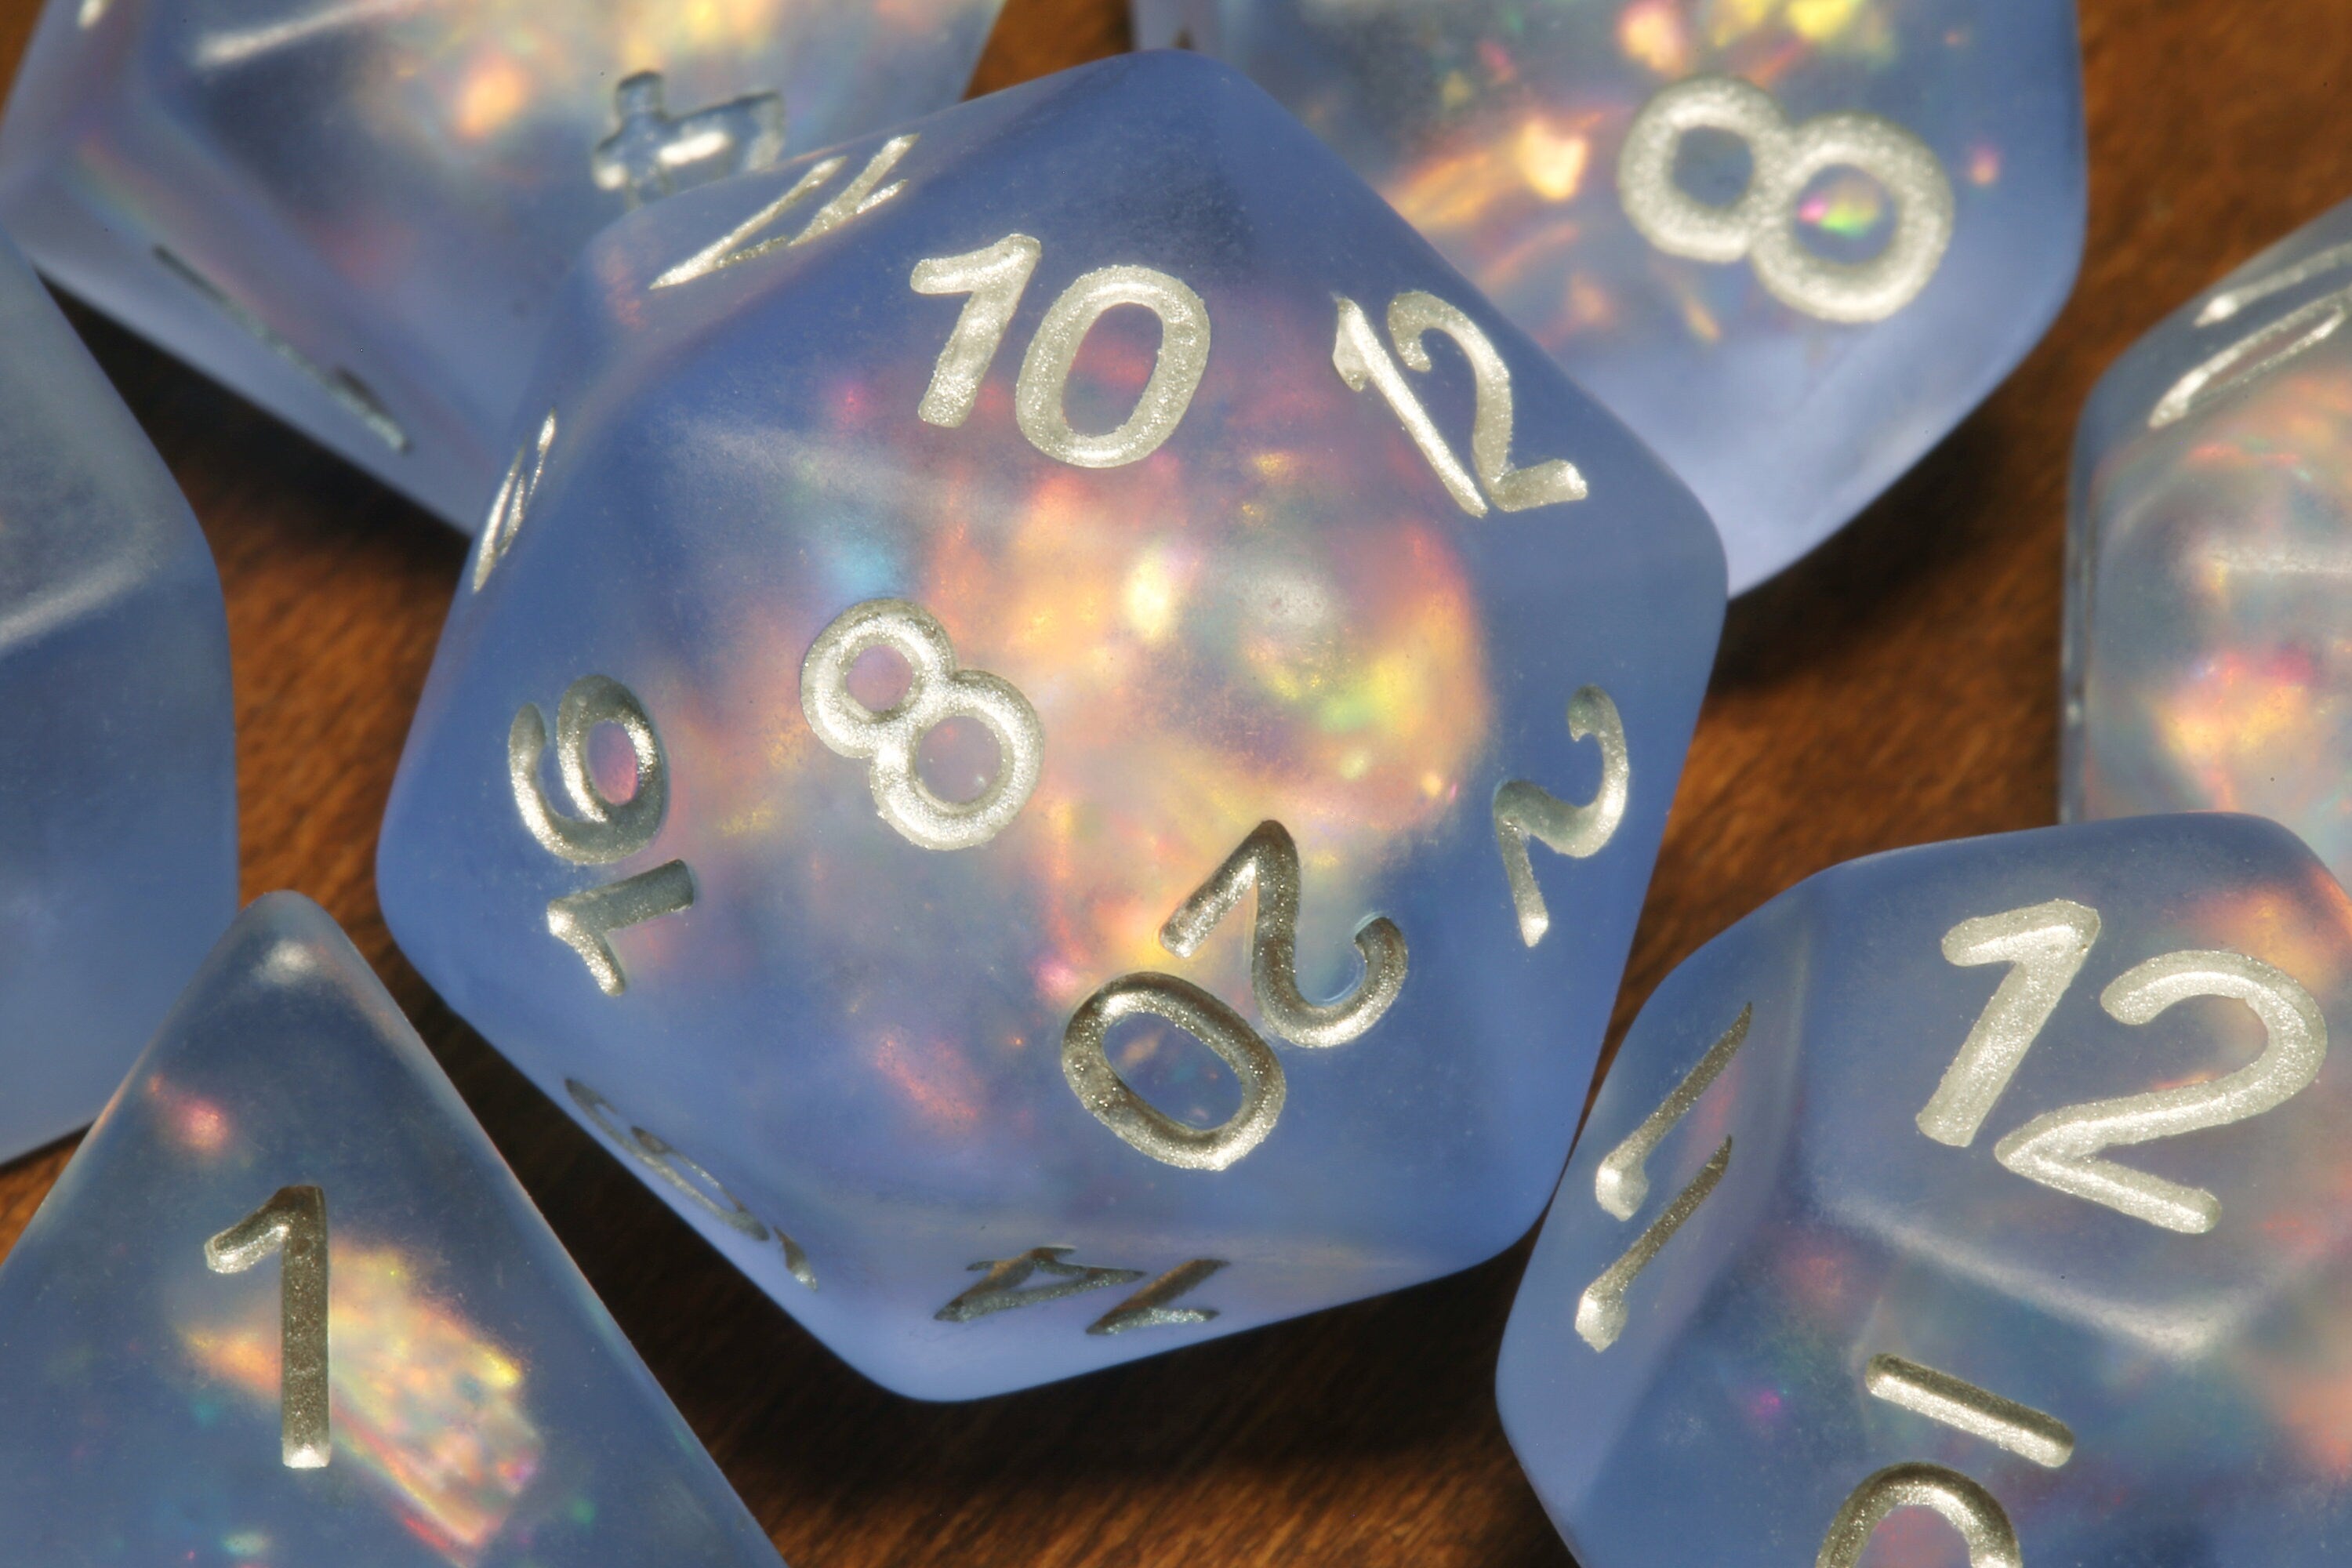 Frost Faerie dice set - Blue frosted dice set